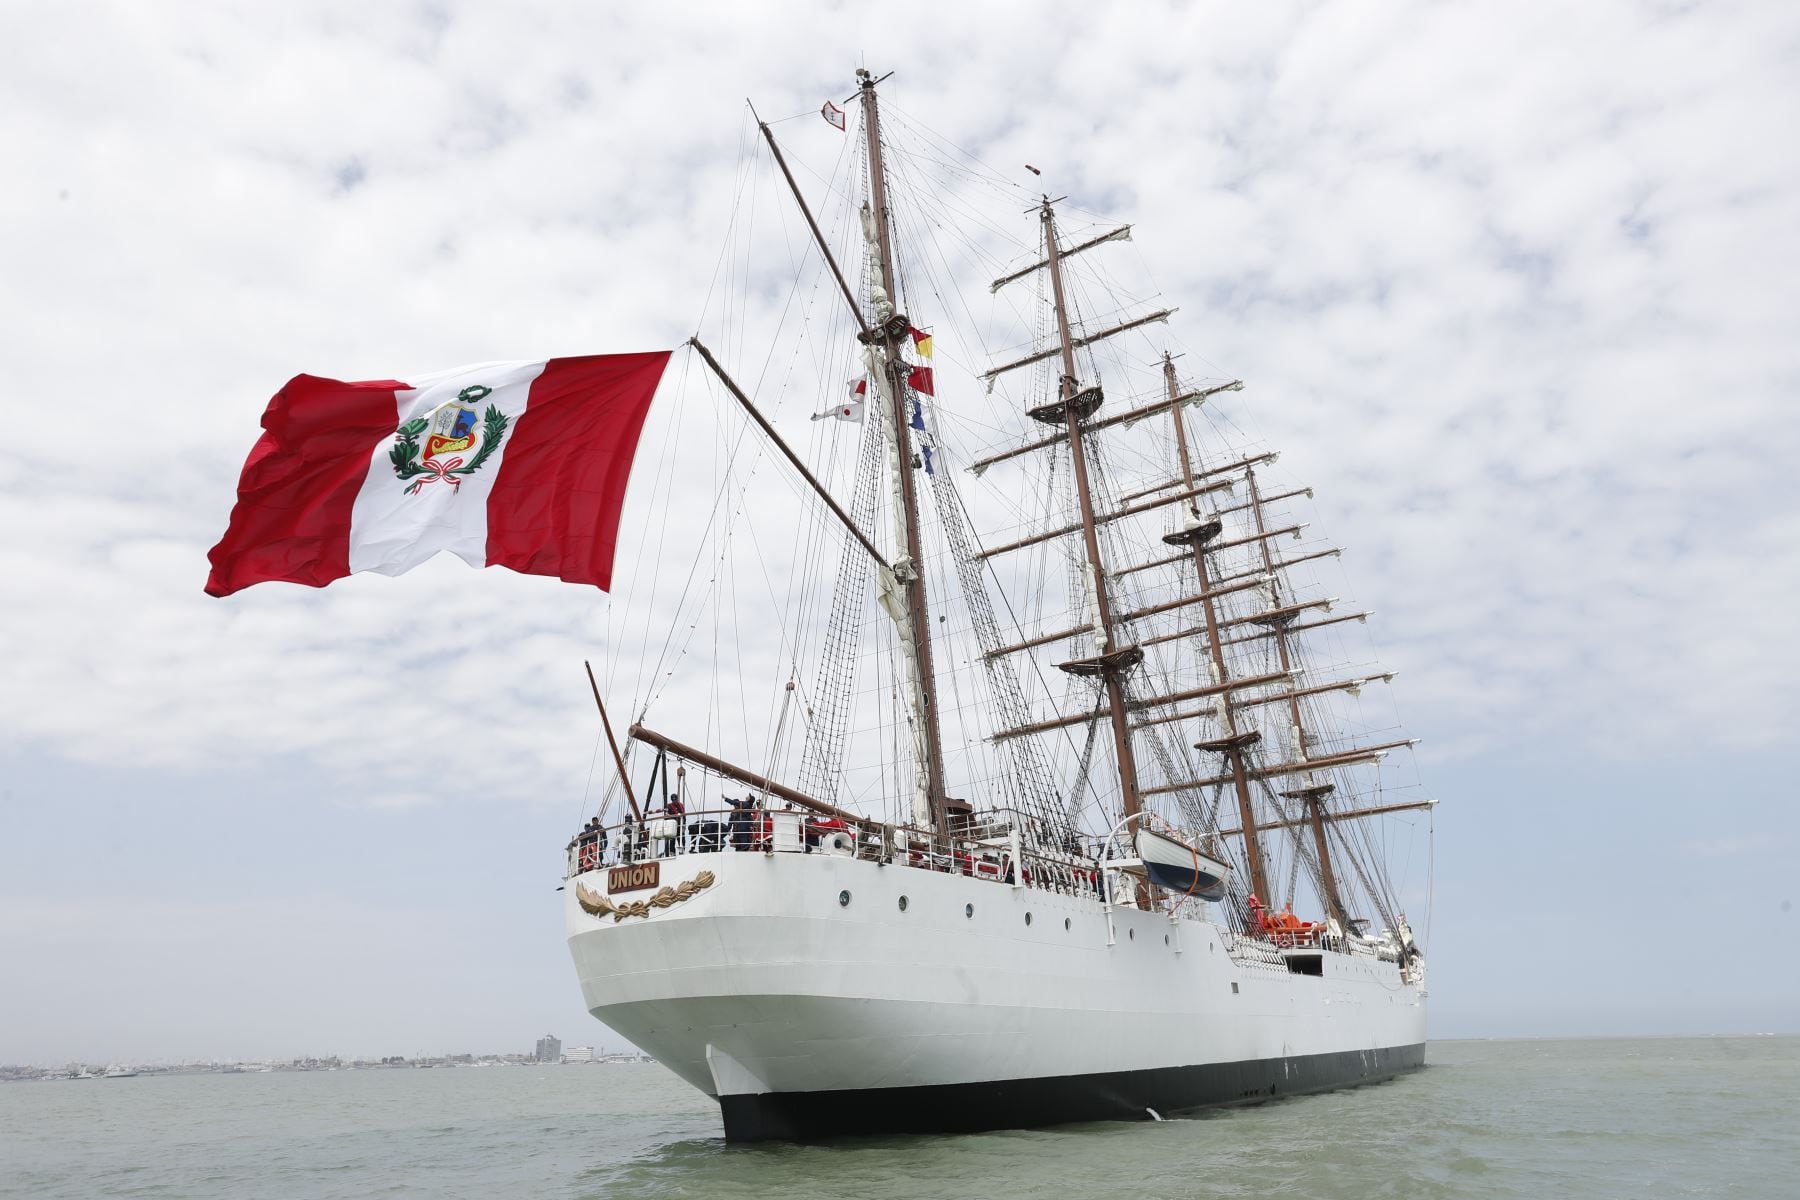 Peruvian training ship Unión arrives in Shanghai on its commemorative round-the-world trip